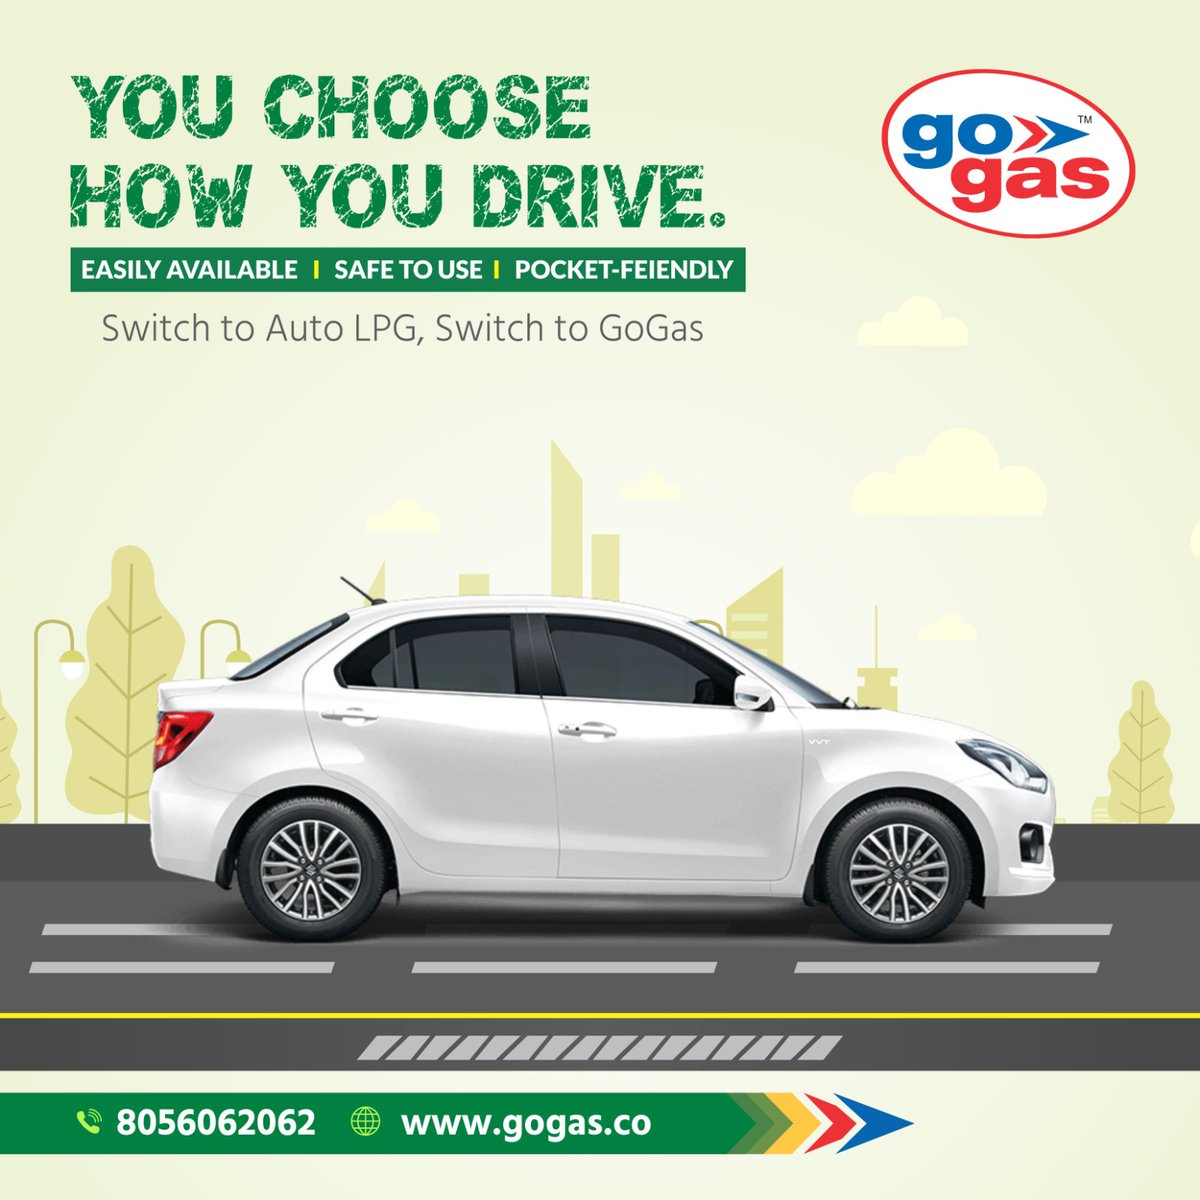 You Choose how you drive

✅ Easily Available
✅ Safe to use
✅ Pocket Friendly

Switch to Auto LPG, Switch to Gogas
Call 📲 8056062062
.
.
.
.
 #lpgpump #confidencepetroleum #naturalgas #ecofriendly #lpg #gogreen #greenfuel #greenenergy #poweredbylpg #lpgbenefits #bengalurucity